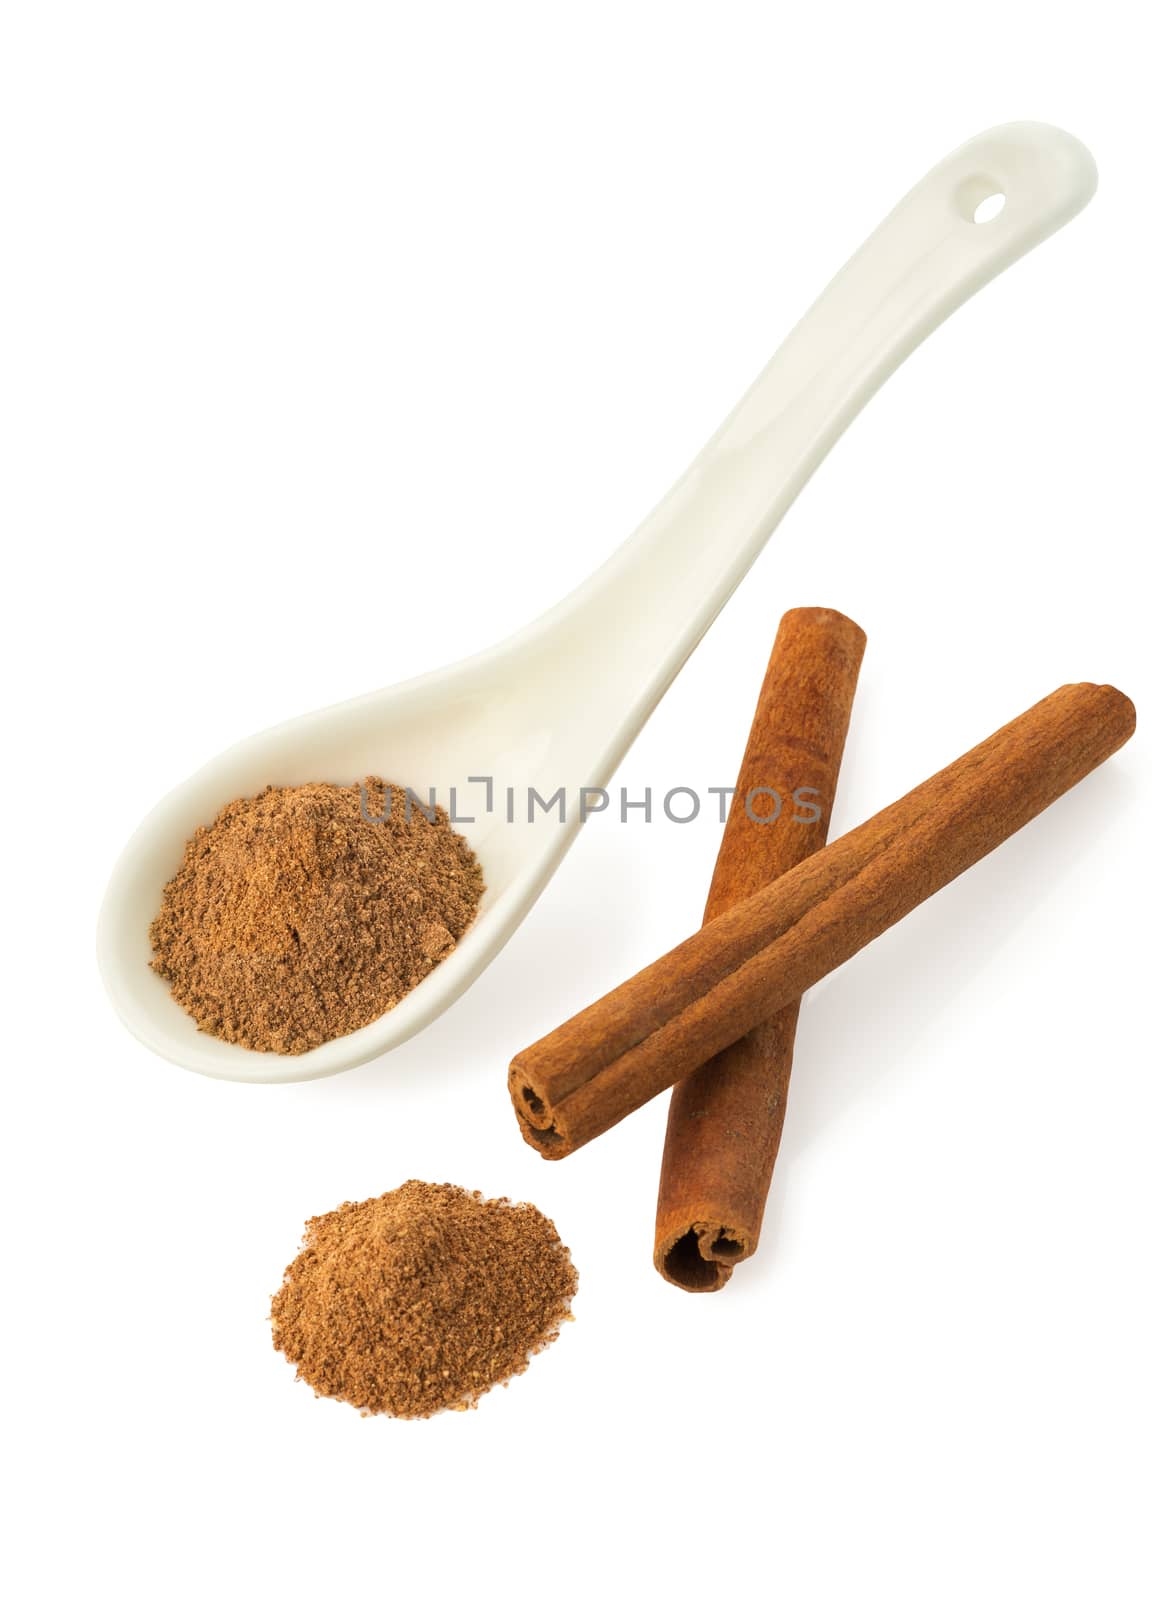 Ground cinnamon in a white ceramic spoon, two cinnamon sticks isolated on white background